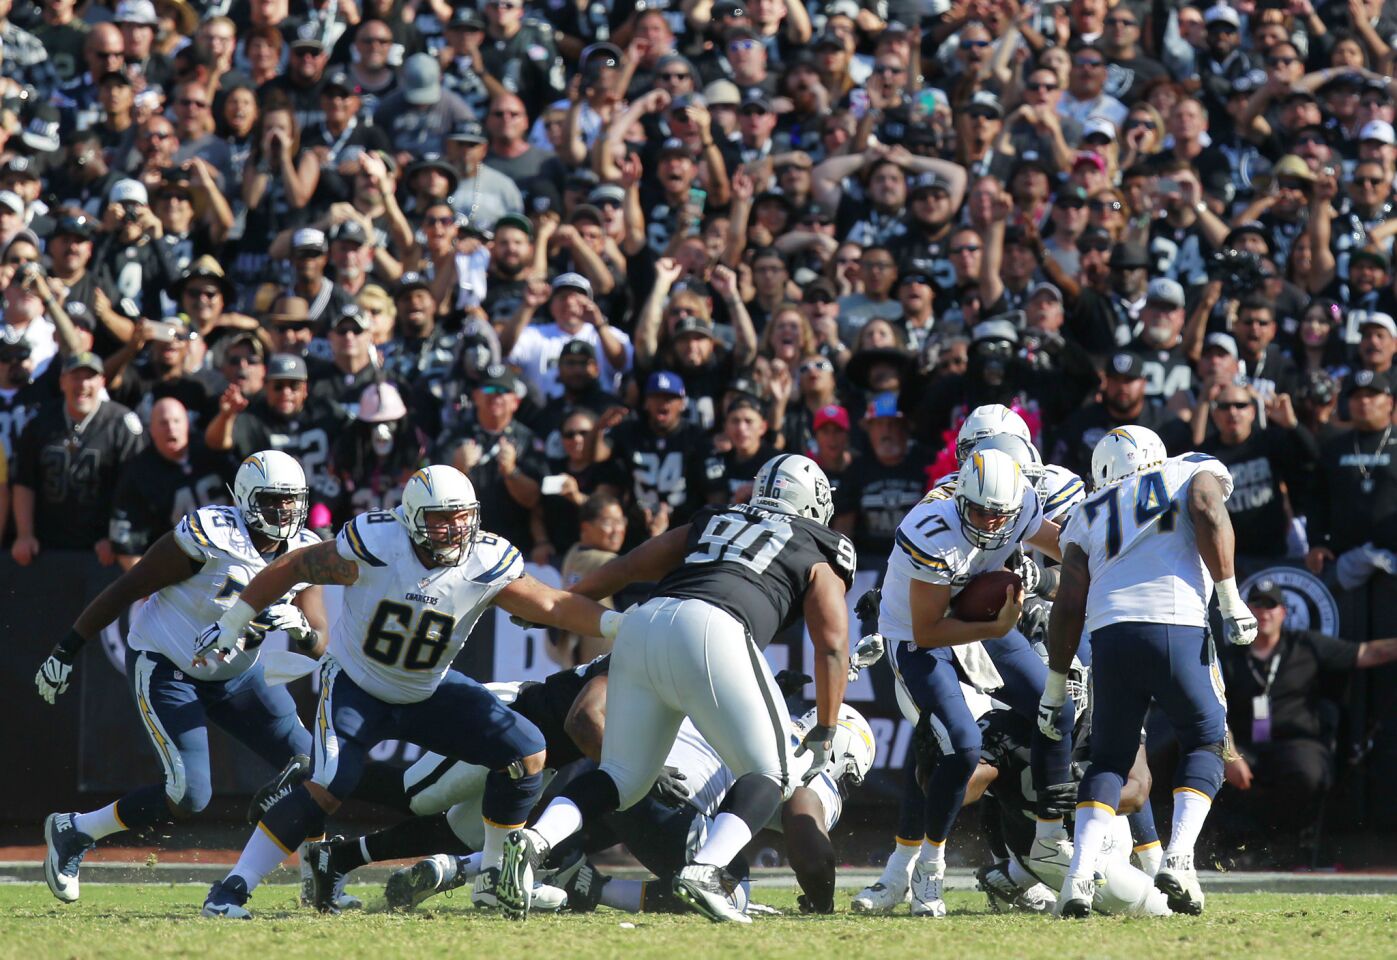 San Diego Chargers Philip Rivers is sacked by Raiders Stacy McGee in the 3rd quarter in Oakland on Oct. 9, 2016. (Photo by K.C. Alfred/The San Diego Union-Tribune)